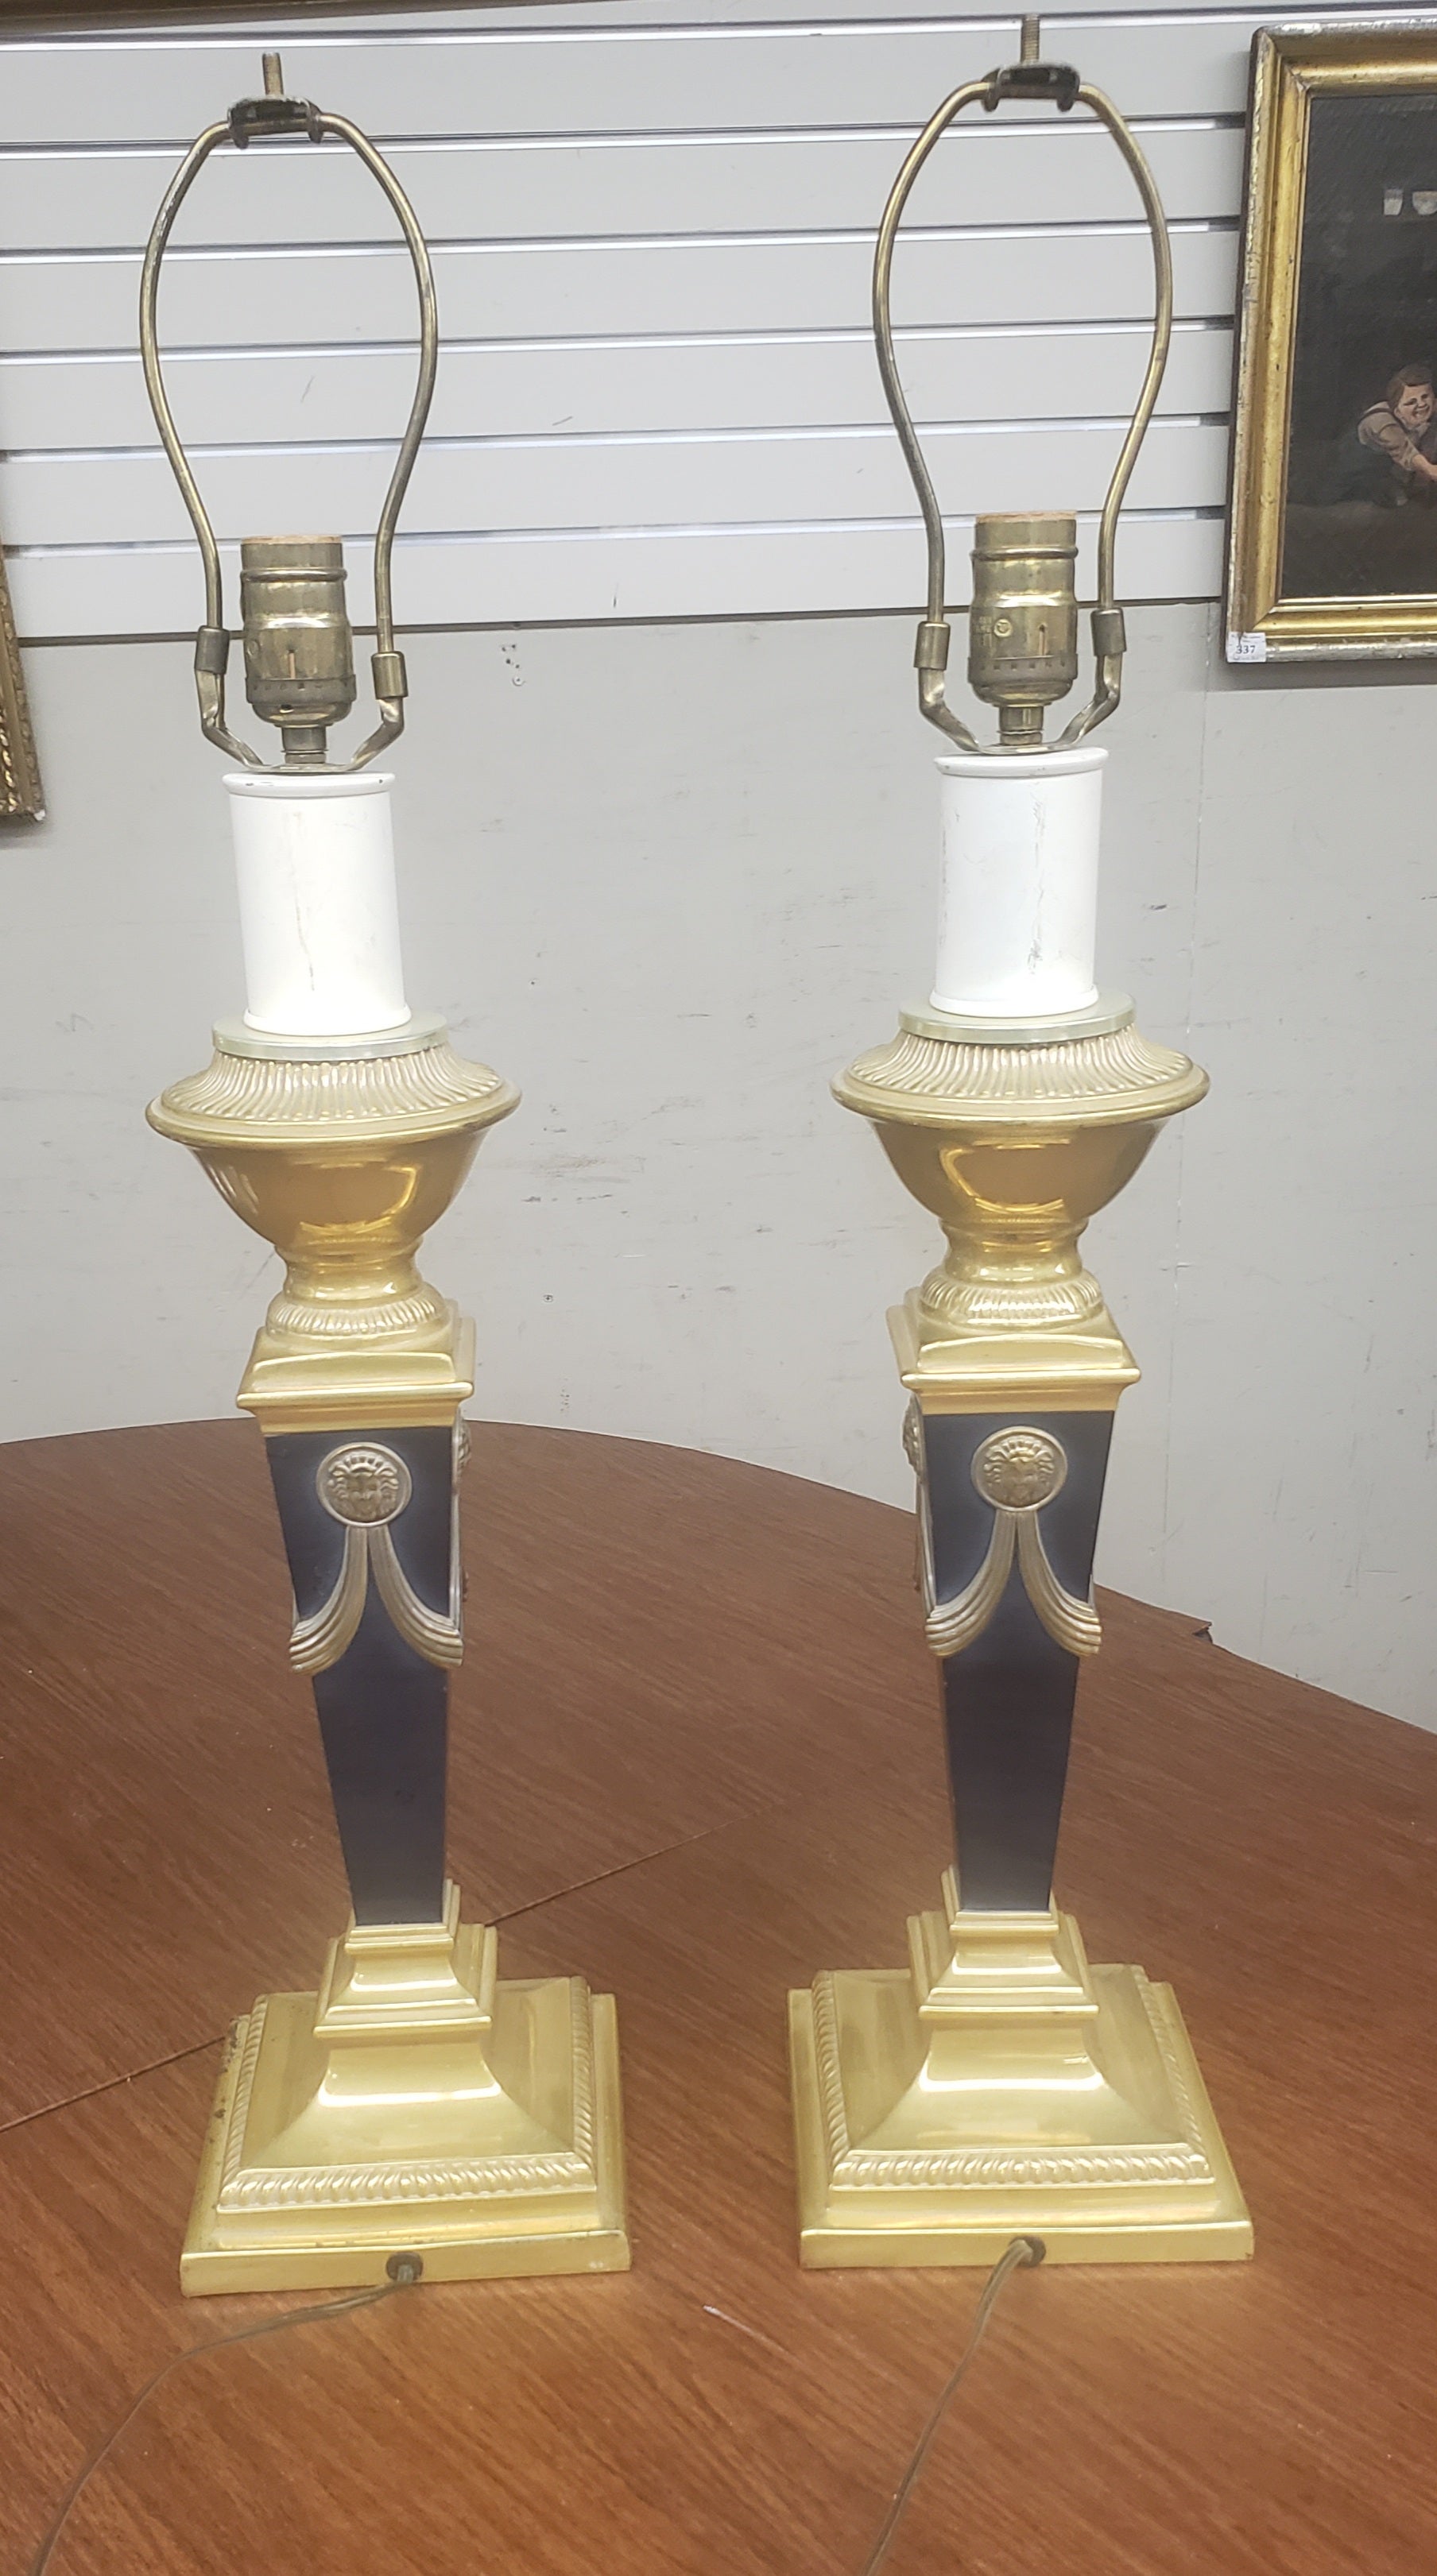 Pair of Medusa Empire style ebonized & enameled brass finished table lamps with famous Medusa medallions on 4 sides.
Measures 6.5